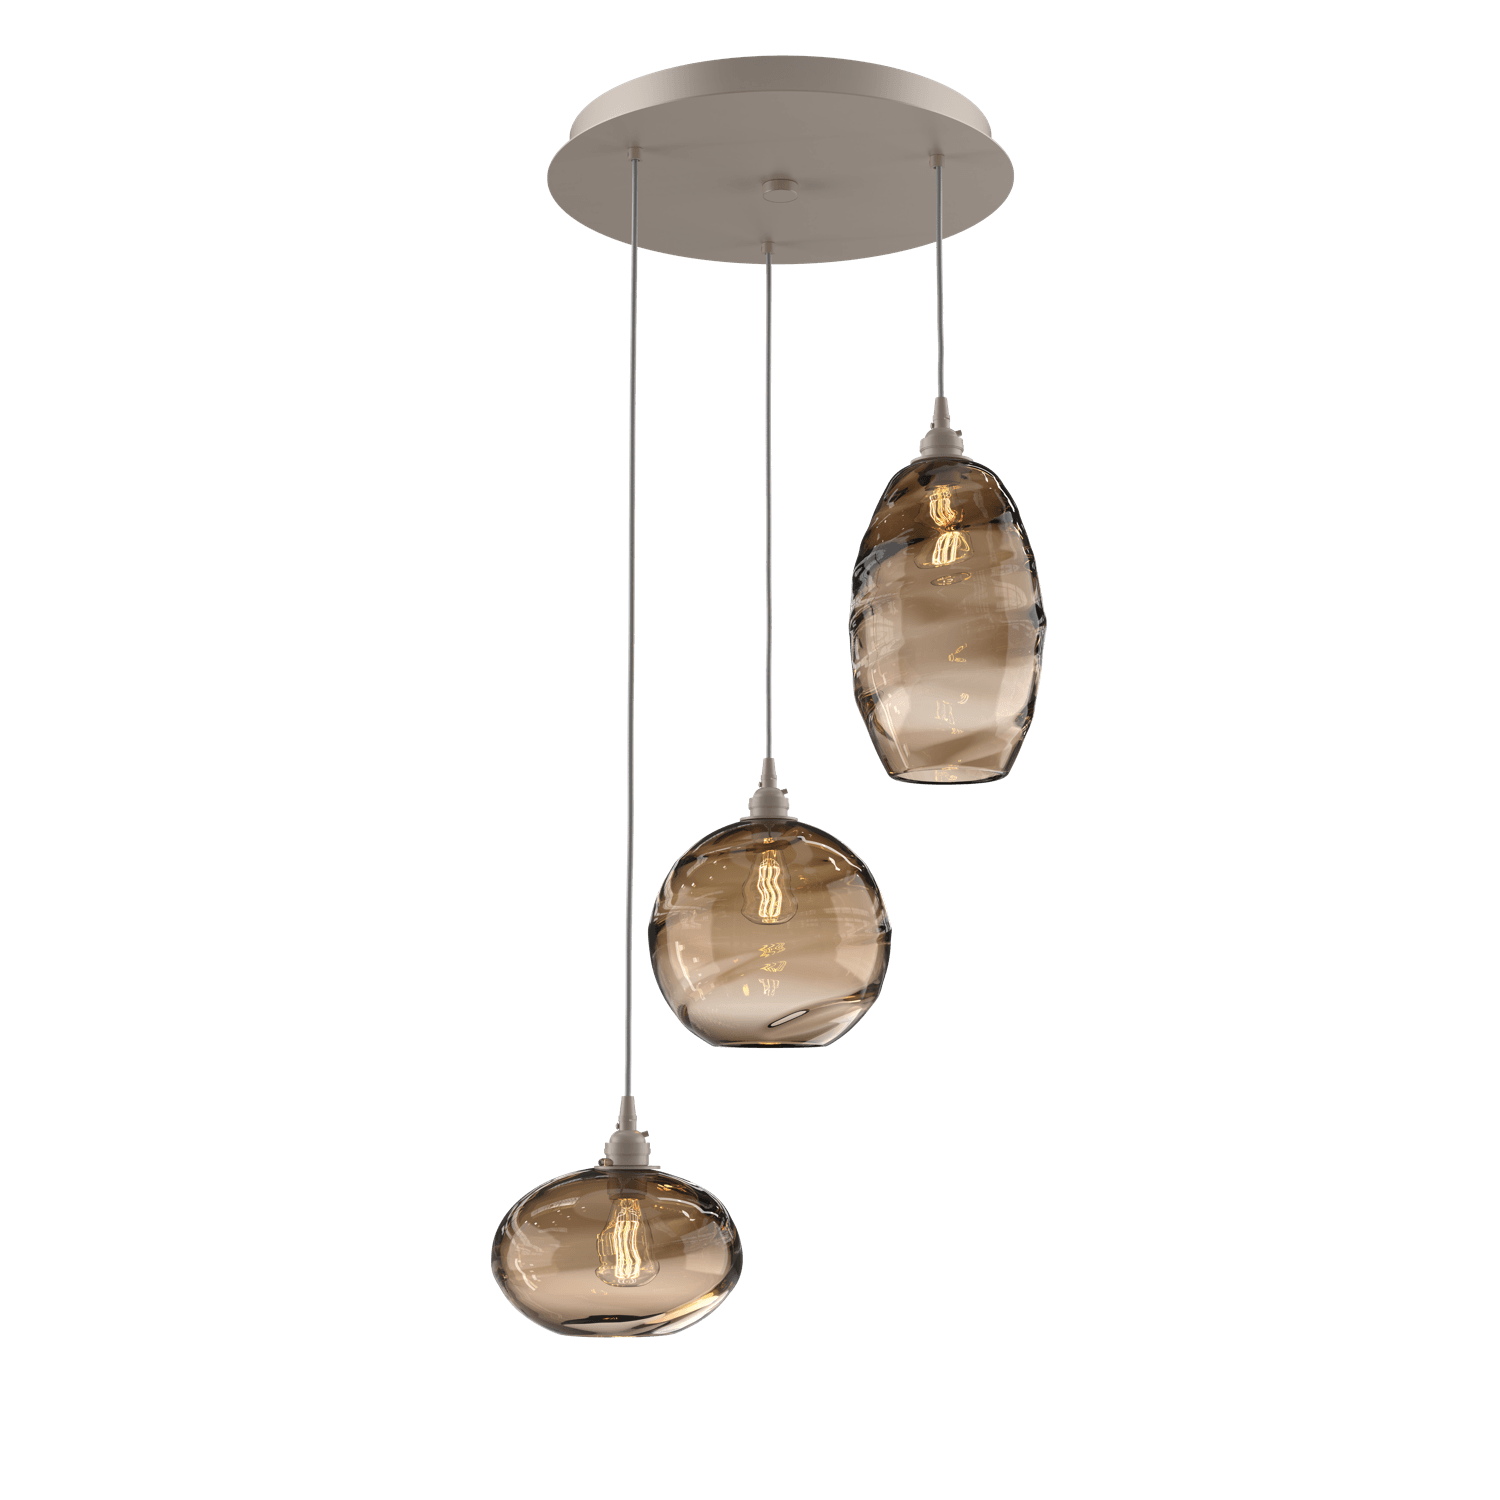 CHB0048-03-BS-OB-Hammerton-Studio-Optic-Blown-Glass-Misto-3-light-round-pendant-chandelier-with-metallic-beige-silver-finish-and-optic-bronze-blown-glass-shades-and-incandescent-lamping